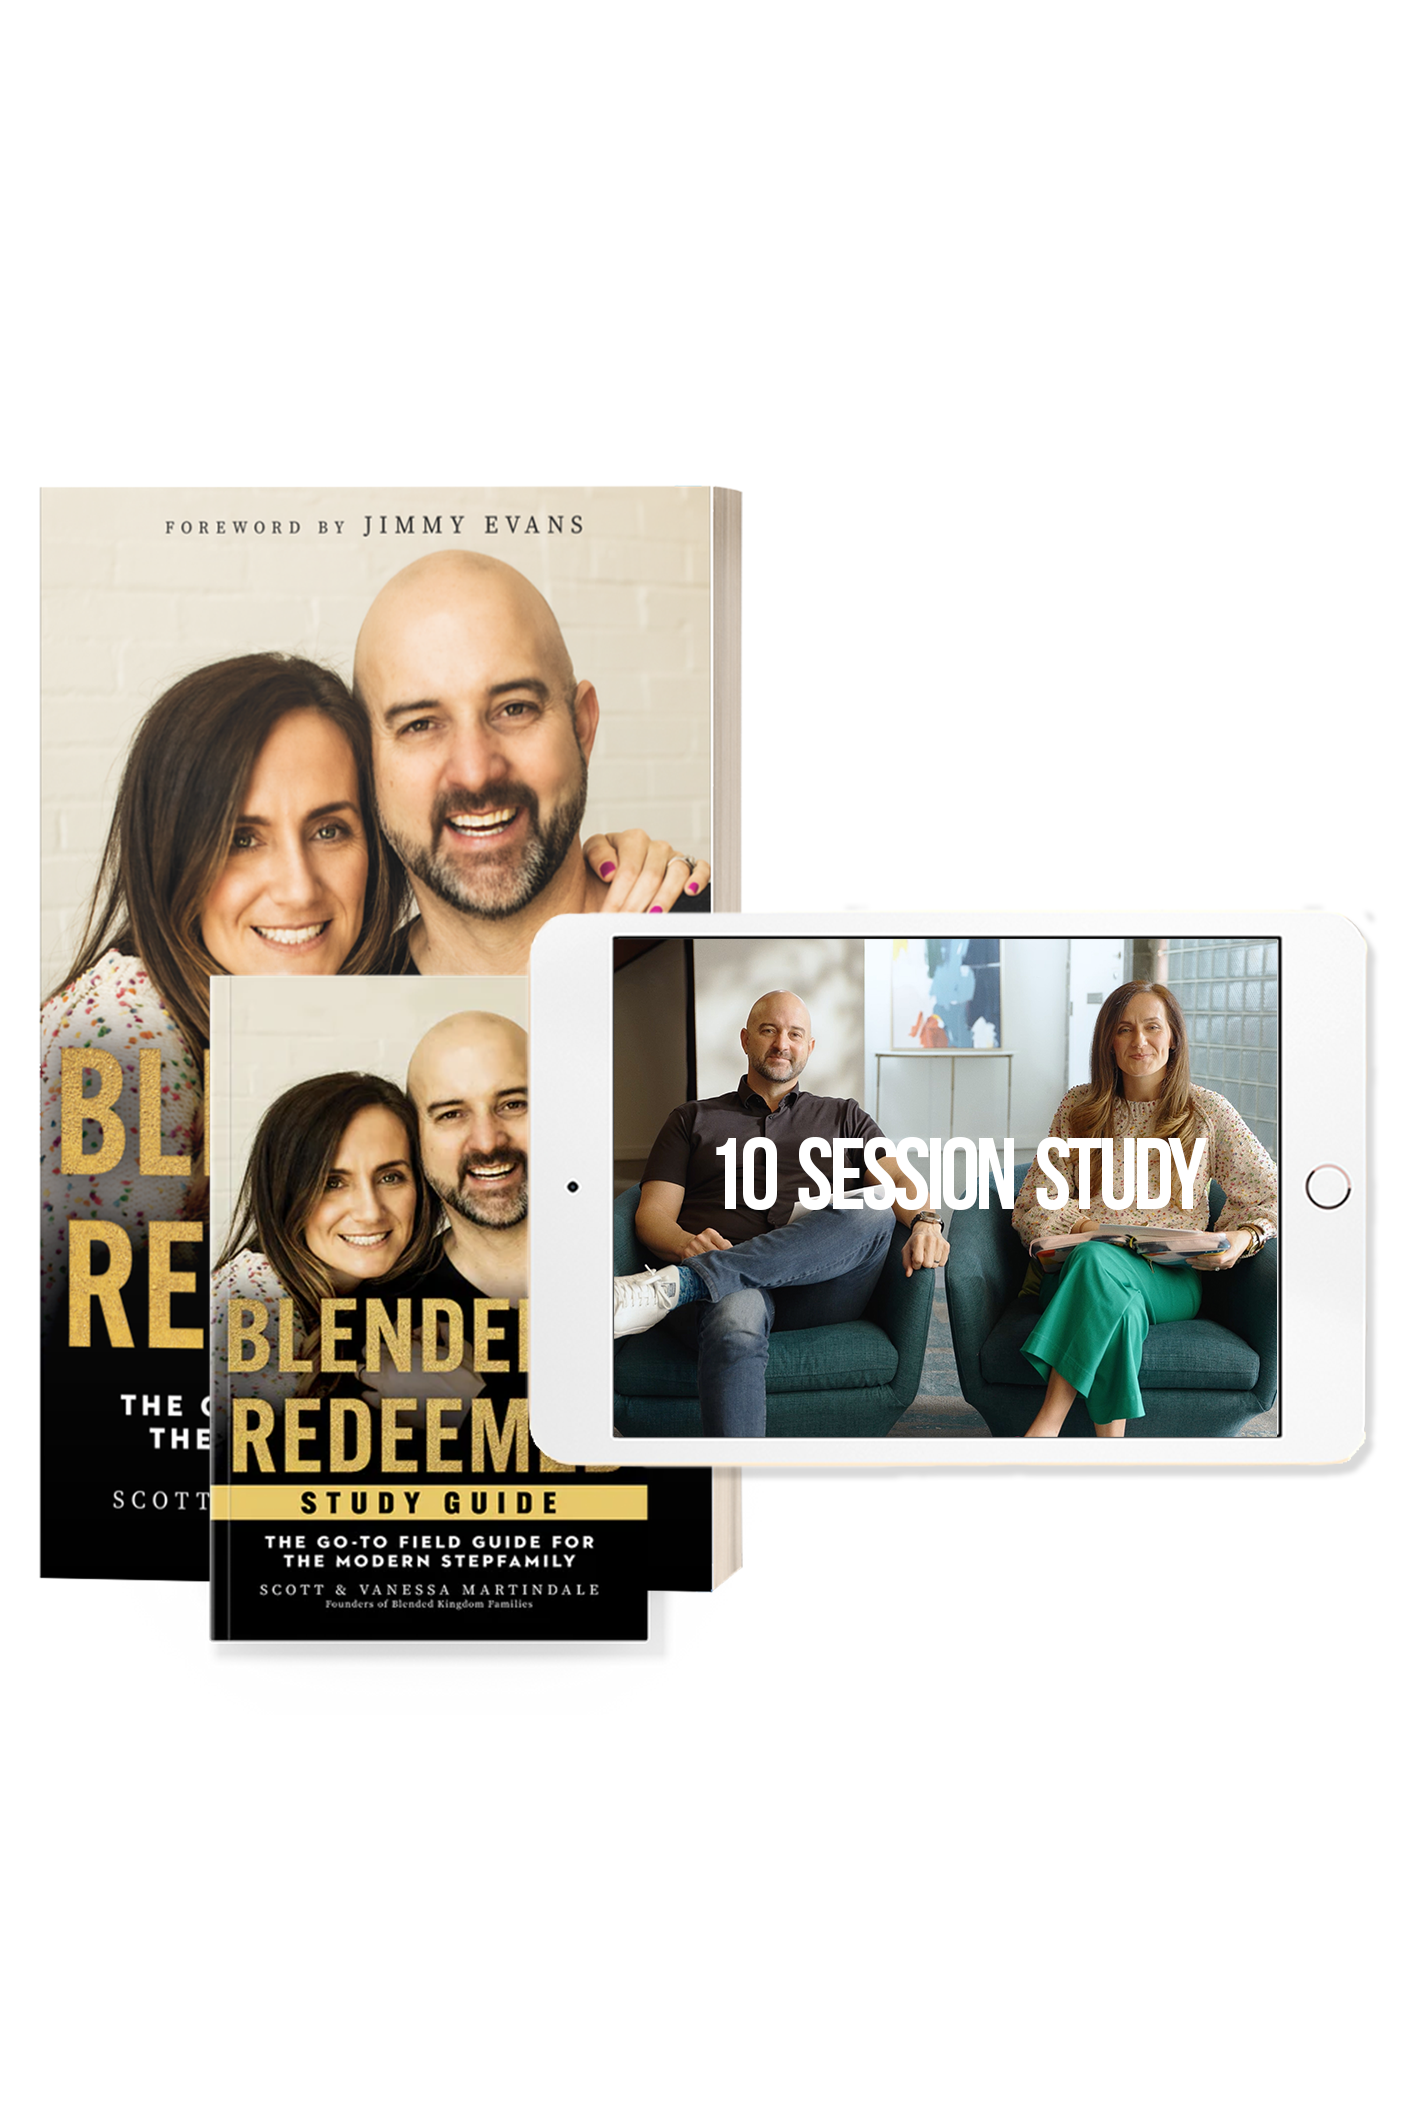 Blended & Redeemed Book, Study Guide, and Teaching Video Bundle